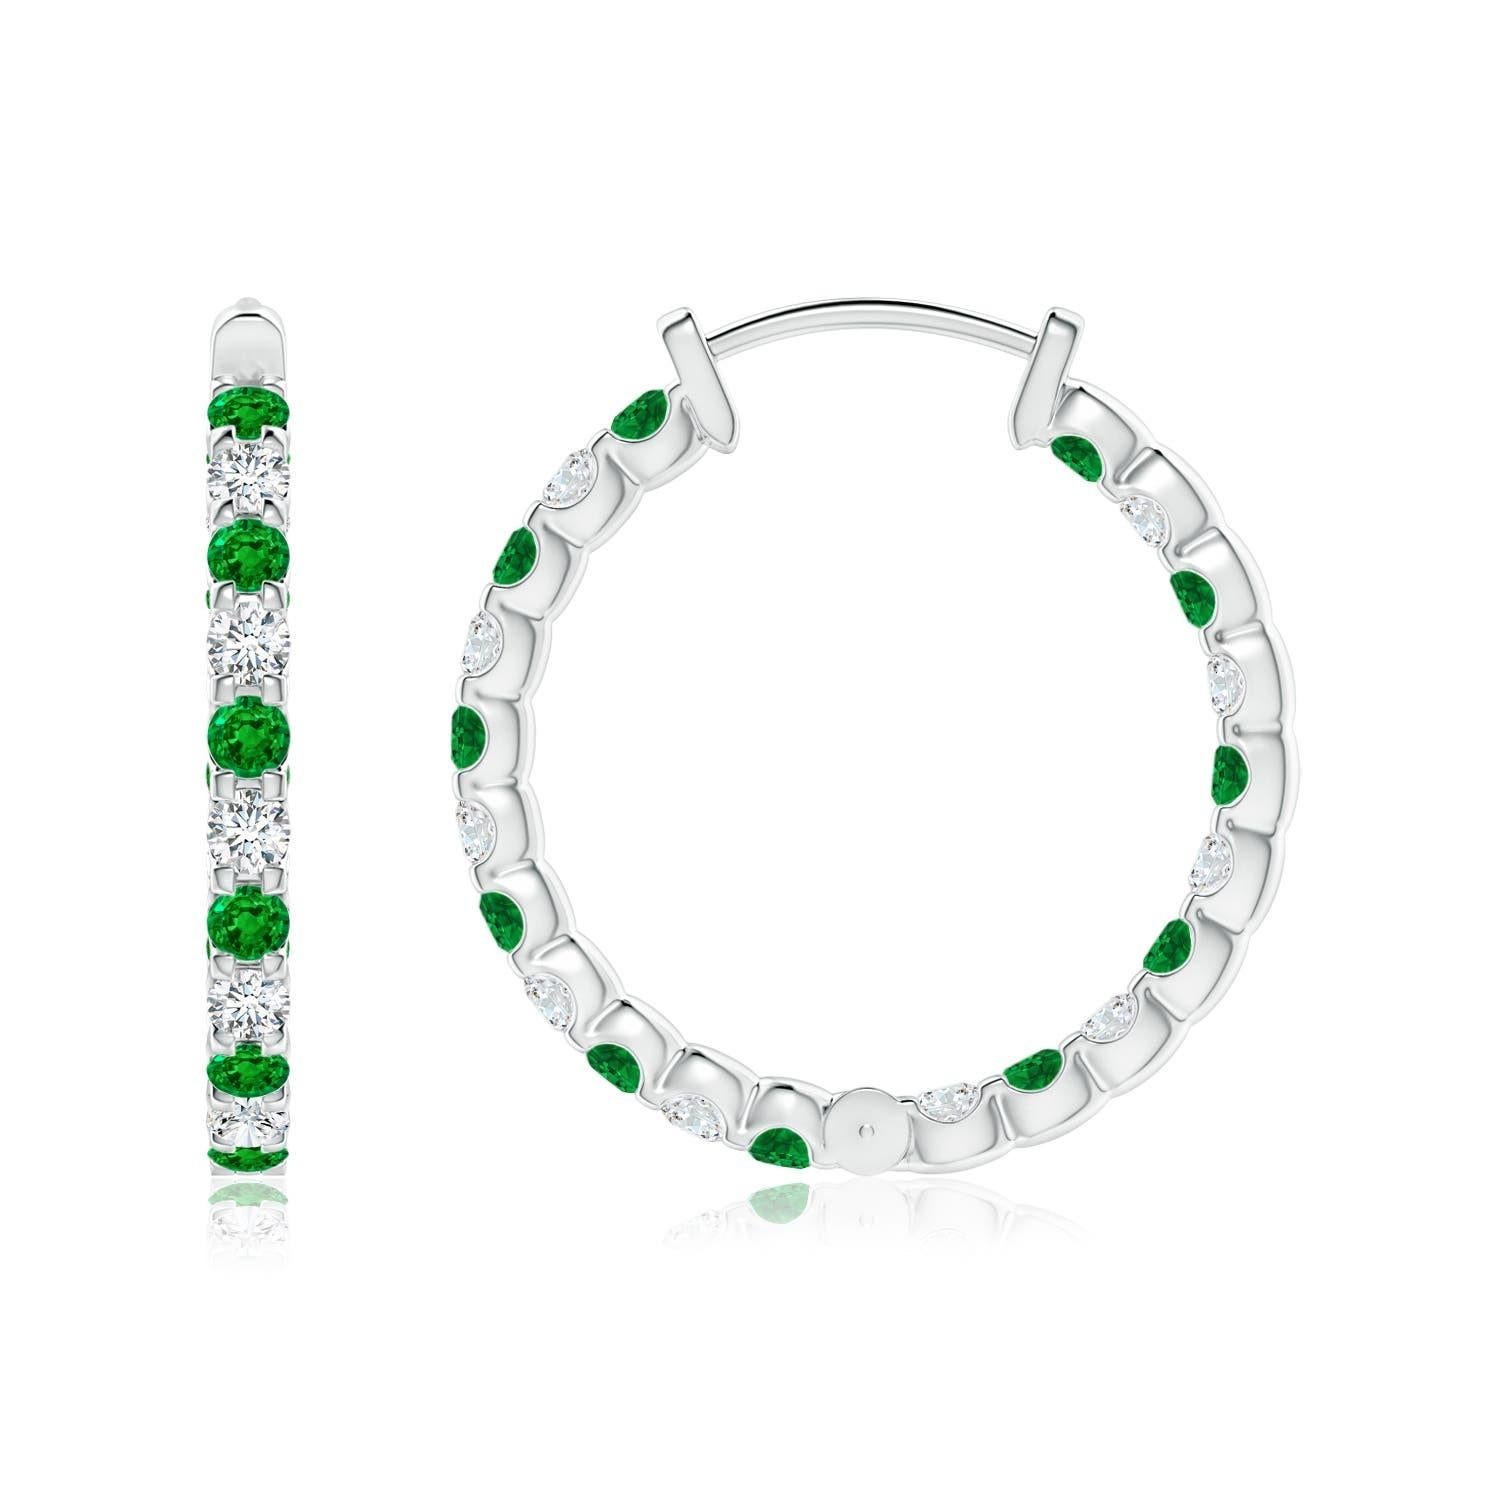 Alternately secured in prong settings are lush green emeralds and brilliant diamonds on these stunning hoop earrings. The scintillating gems are embellished on the outside as well as the inside of these 14k white gold hoops, showcasing a striking